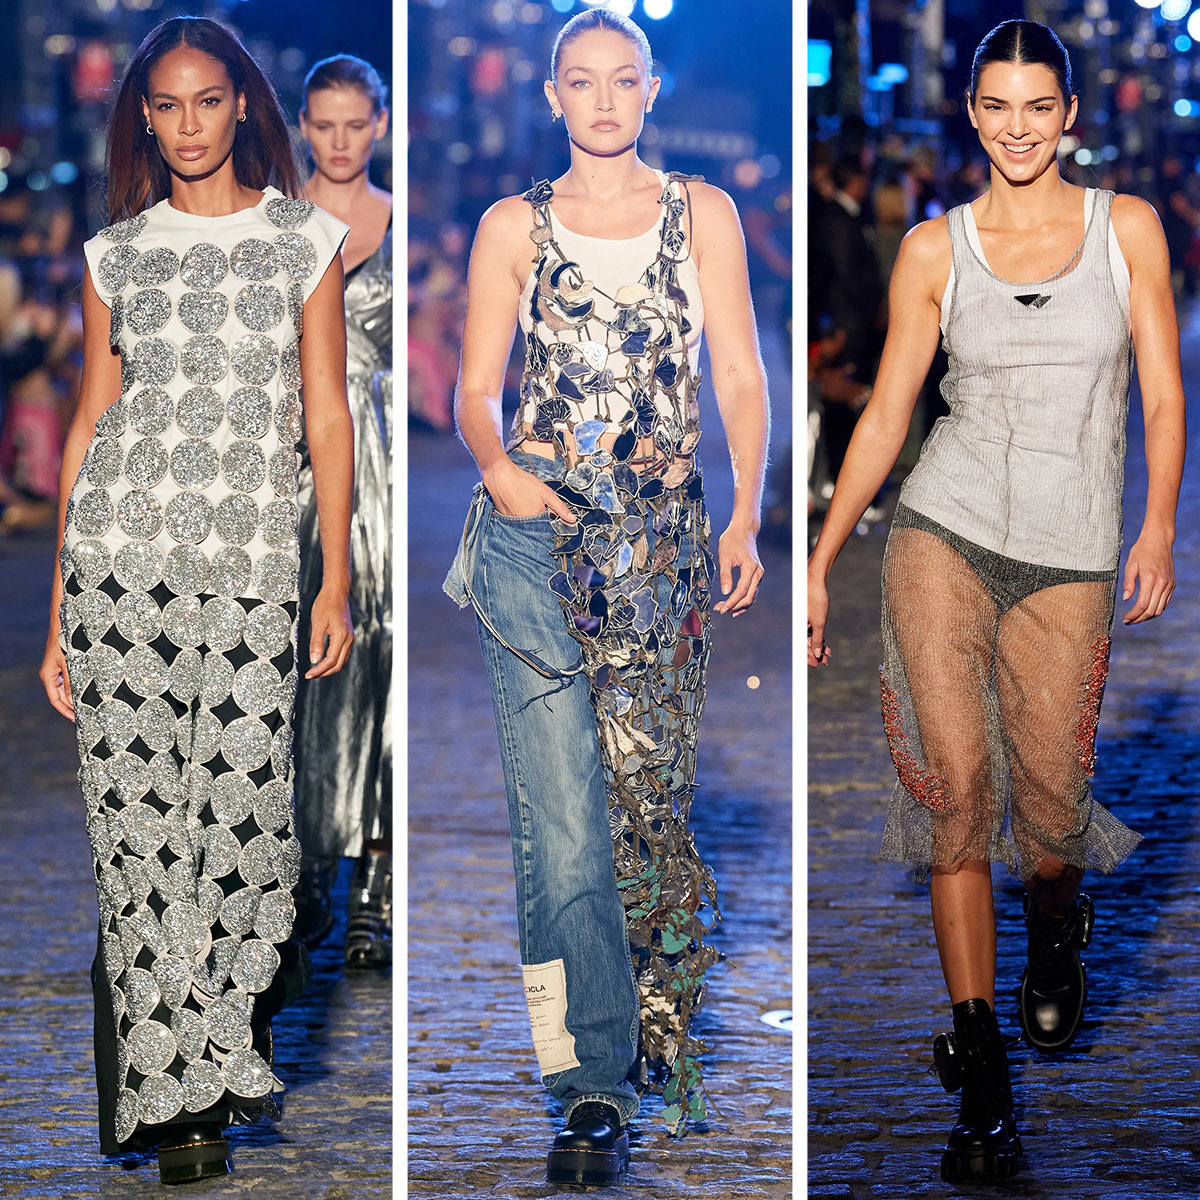 Bella Hadid, Kendall Jenner, And More Rocked The Metallic Trend On The  Runway For Fashion Week—Wait 'Til You See Kendall's Sheer Dress! - SHEfinds